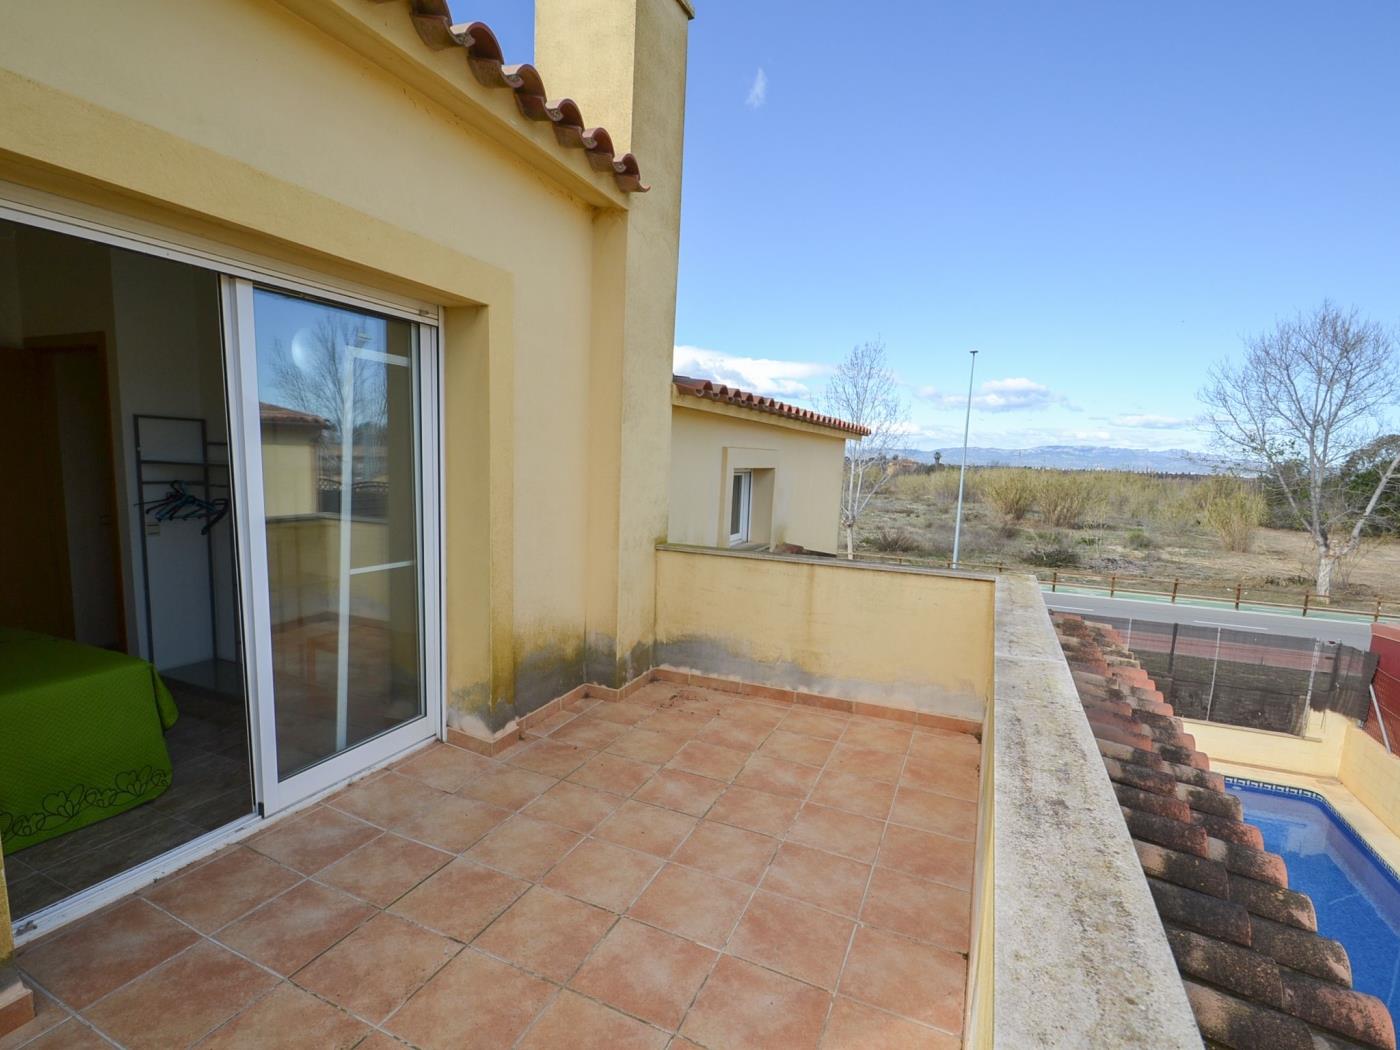 Casa Blaumar for 8-10 persons with privat pool in Riumar Deltebre